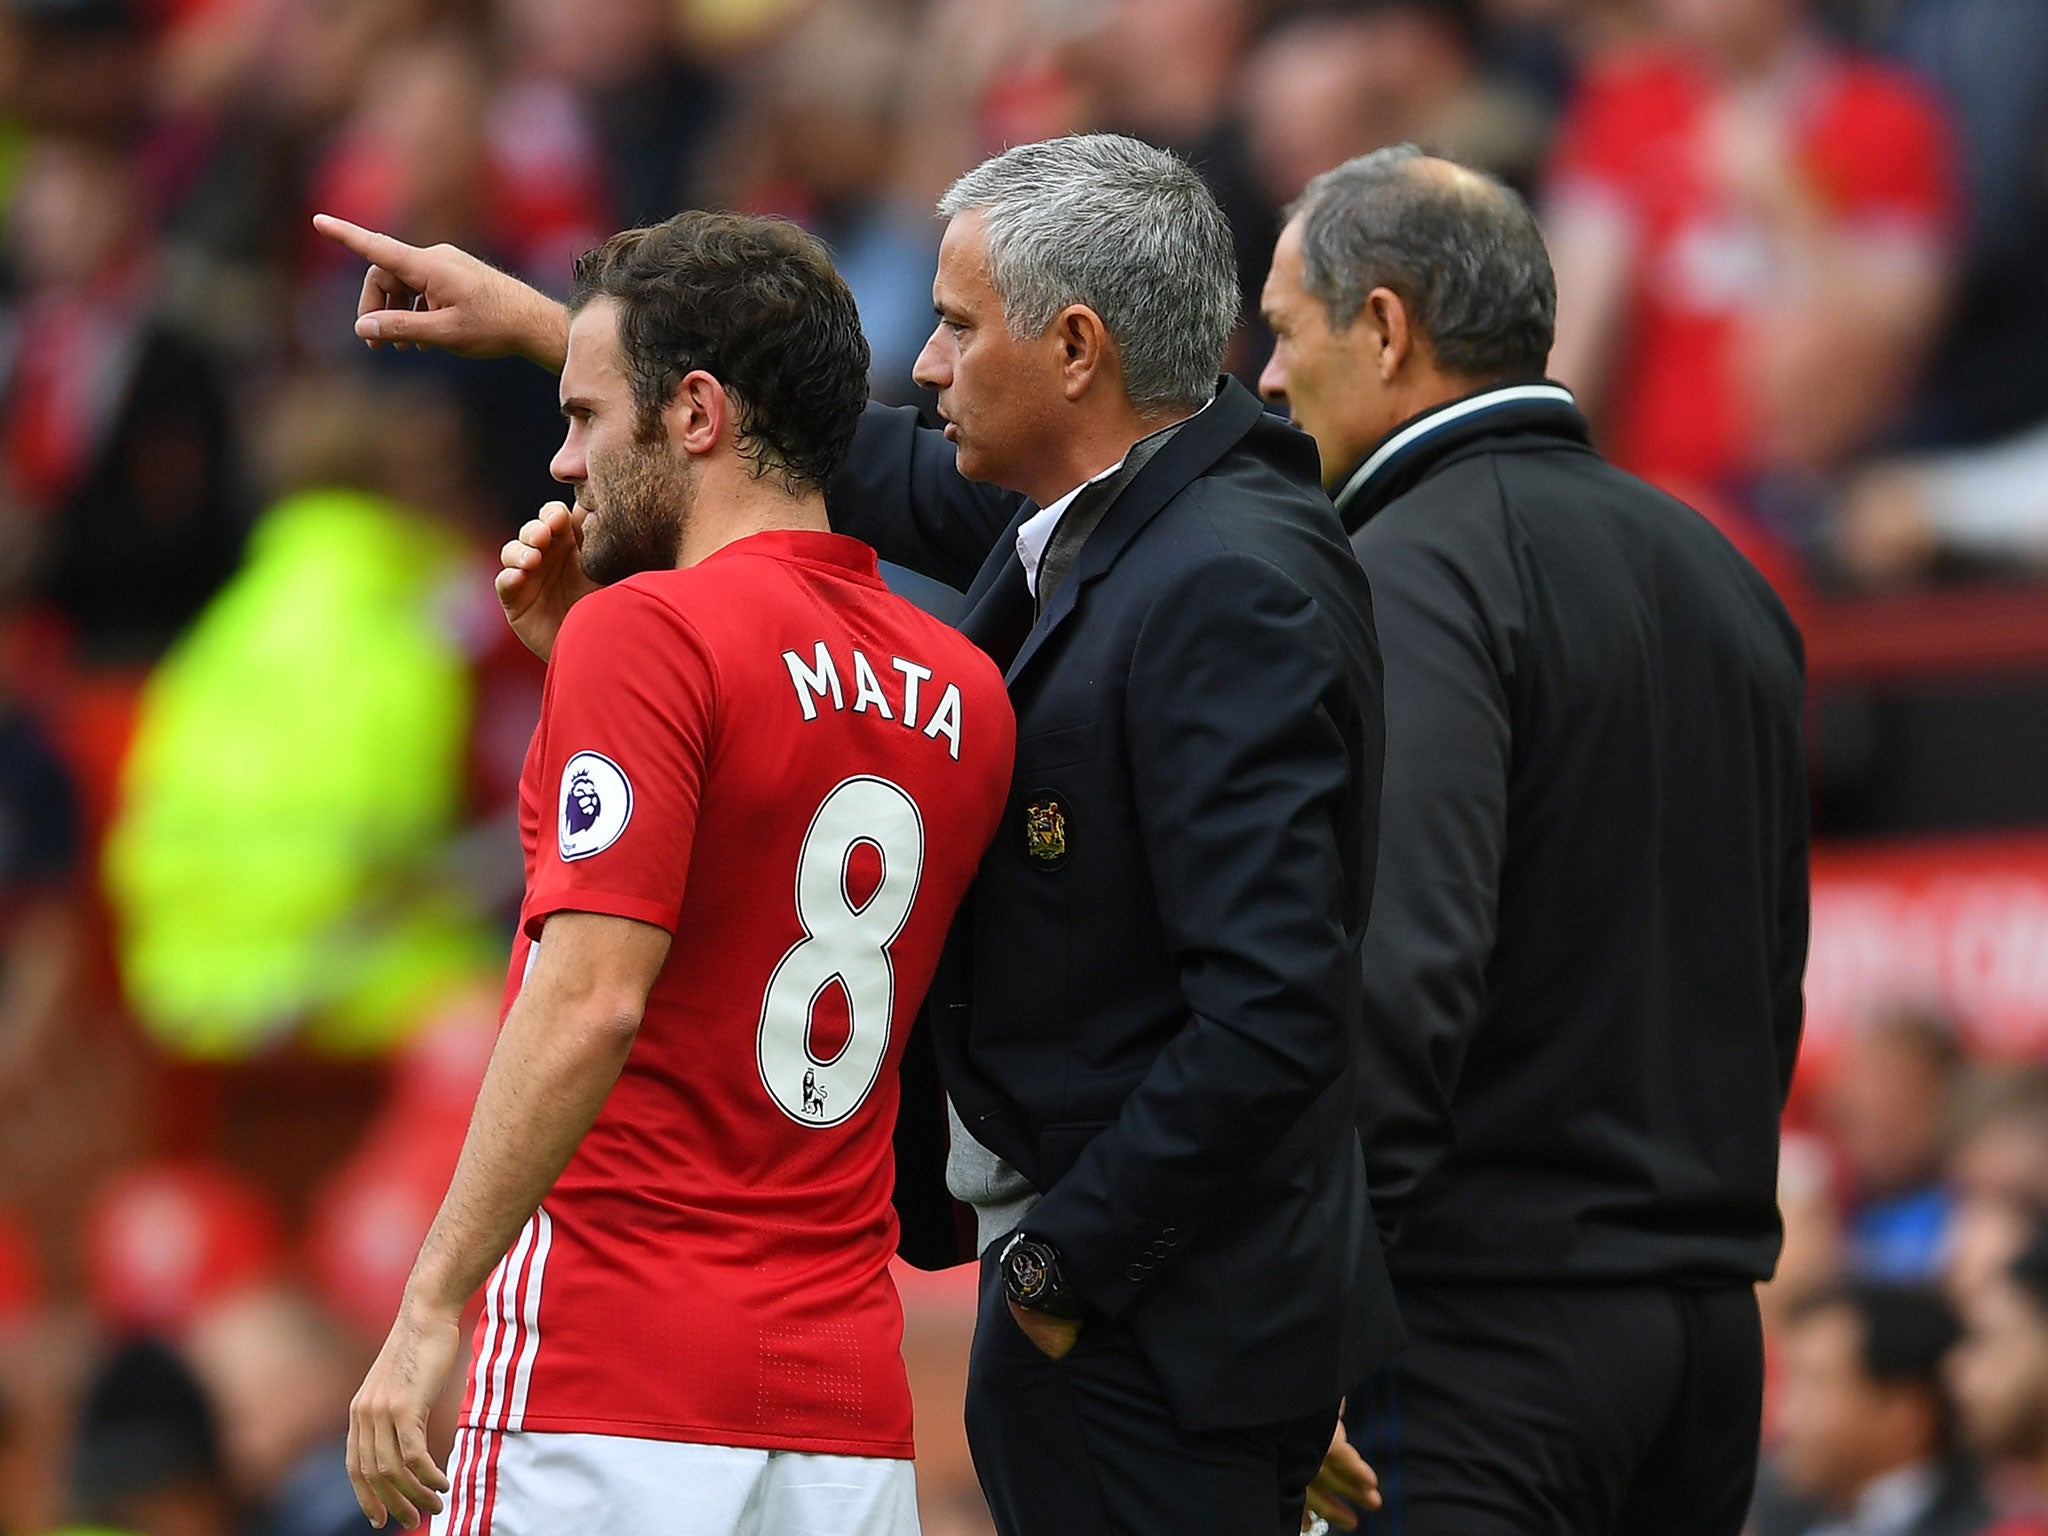 Mata also said the side are playing some of their best football since Sir Alex Ferguson's retirement in 2013